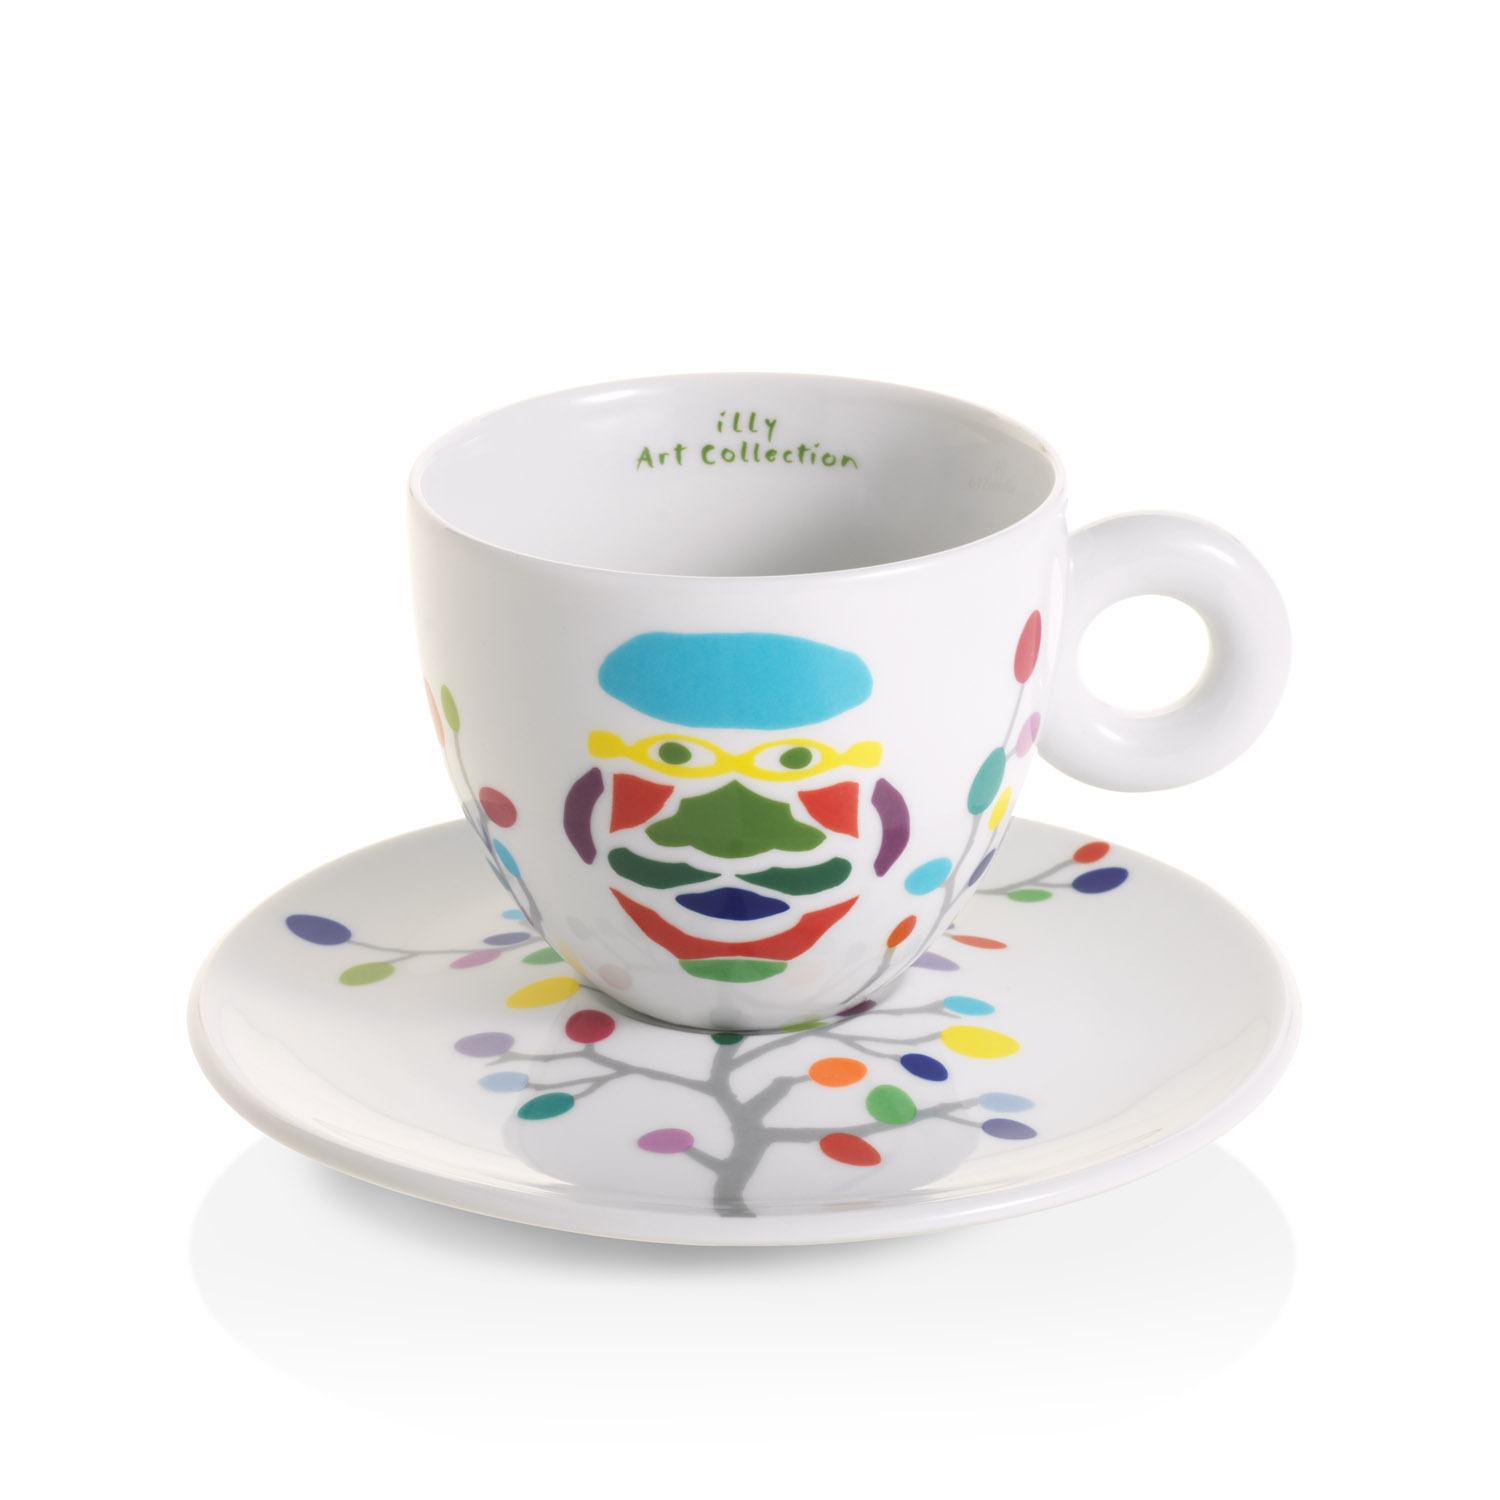 illy Art Collection PASCALE MARTHINE TAYOU Σετ Δώρου 6 Cappuccino Cups, Φλιτζάνια , 02-02-6091